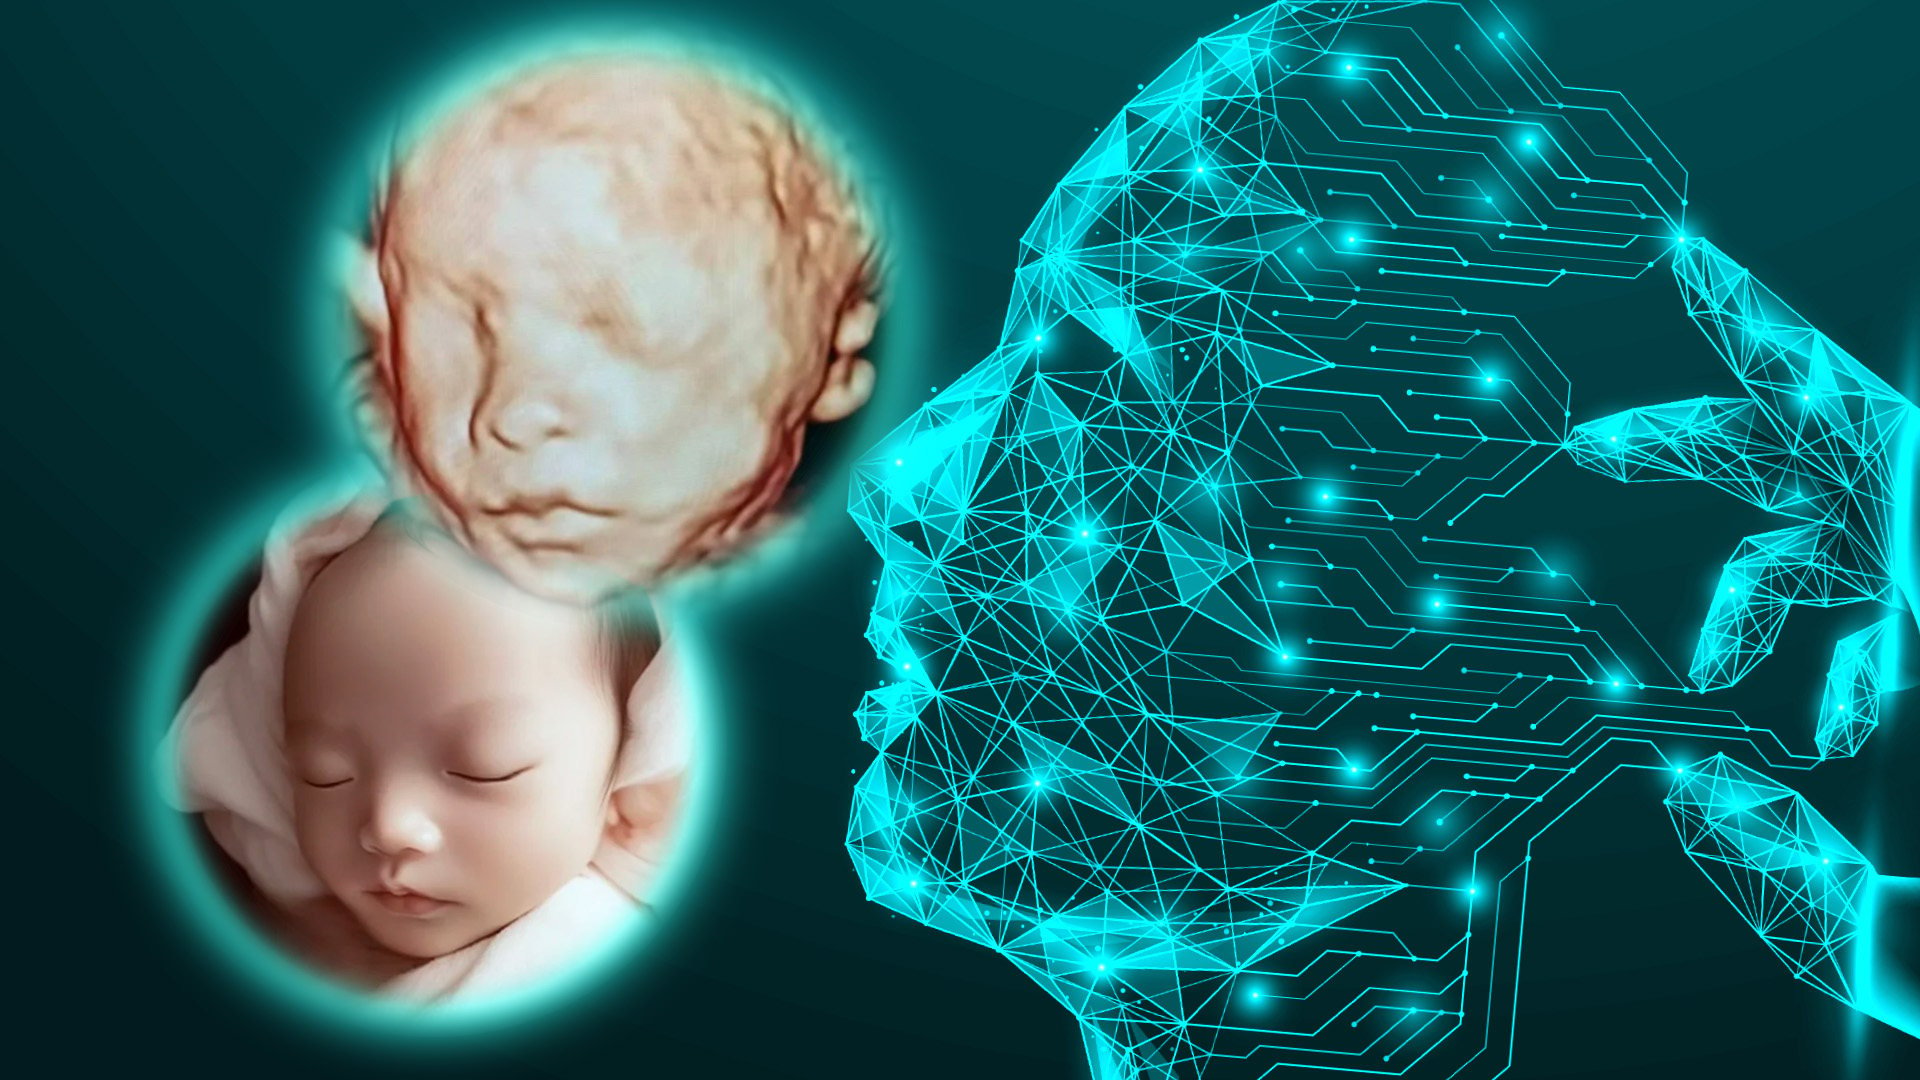 Expectant parents in China are turning to artificial intelligence to find out what their newborns will look like. Photo: SCMP composite/Shutterstock/Xiaohongshu